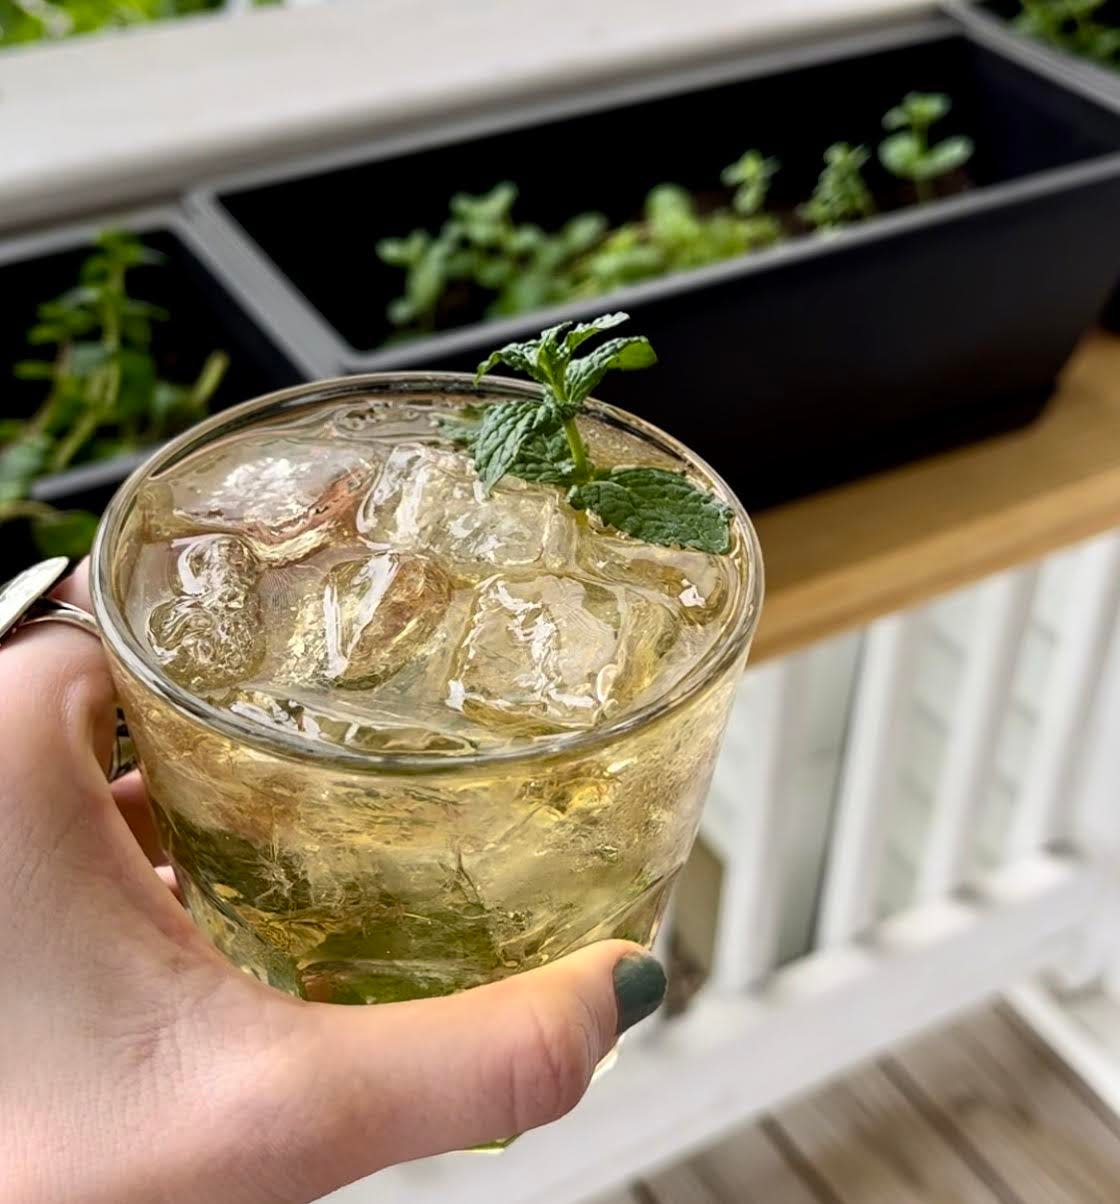 The mint julep, made with bourbon, sugar, water, mint and crushed ice, has been part of the Kentucky Derby since 1938. This one comes from the B.A. Colonial restaurant in Louisville, Kentucky.